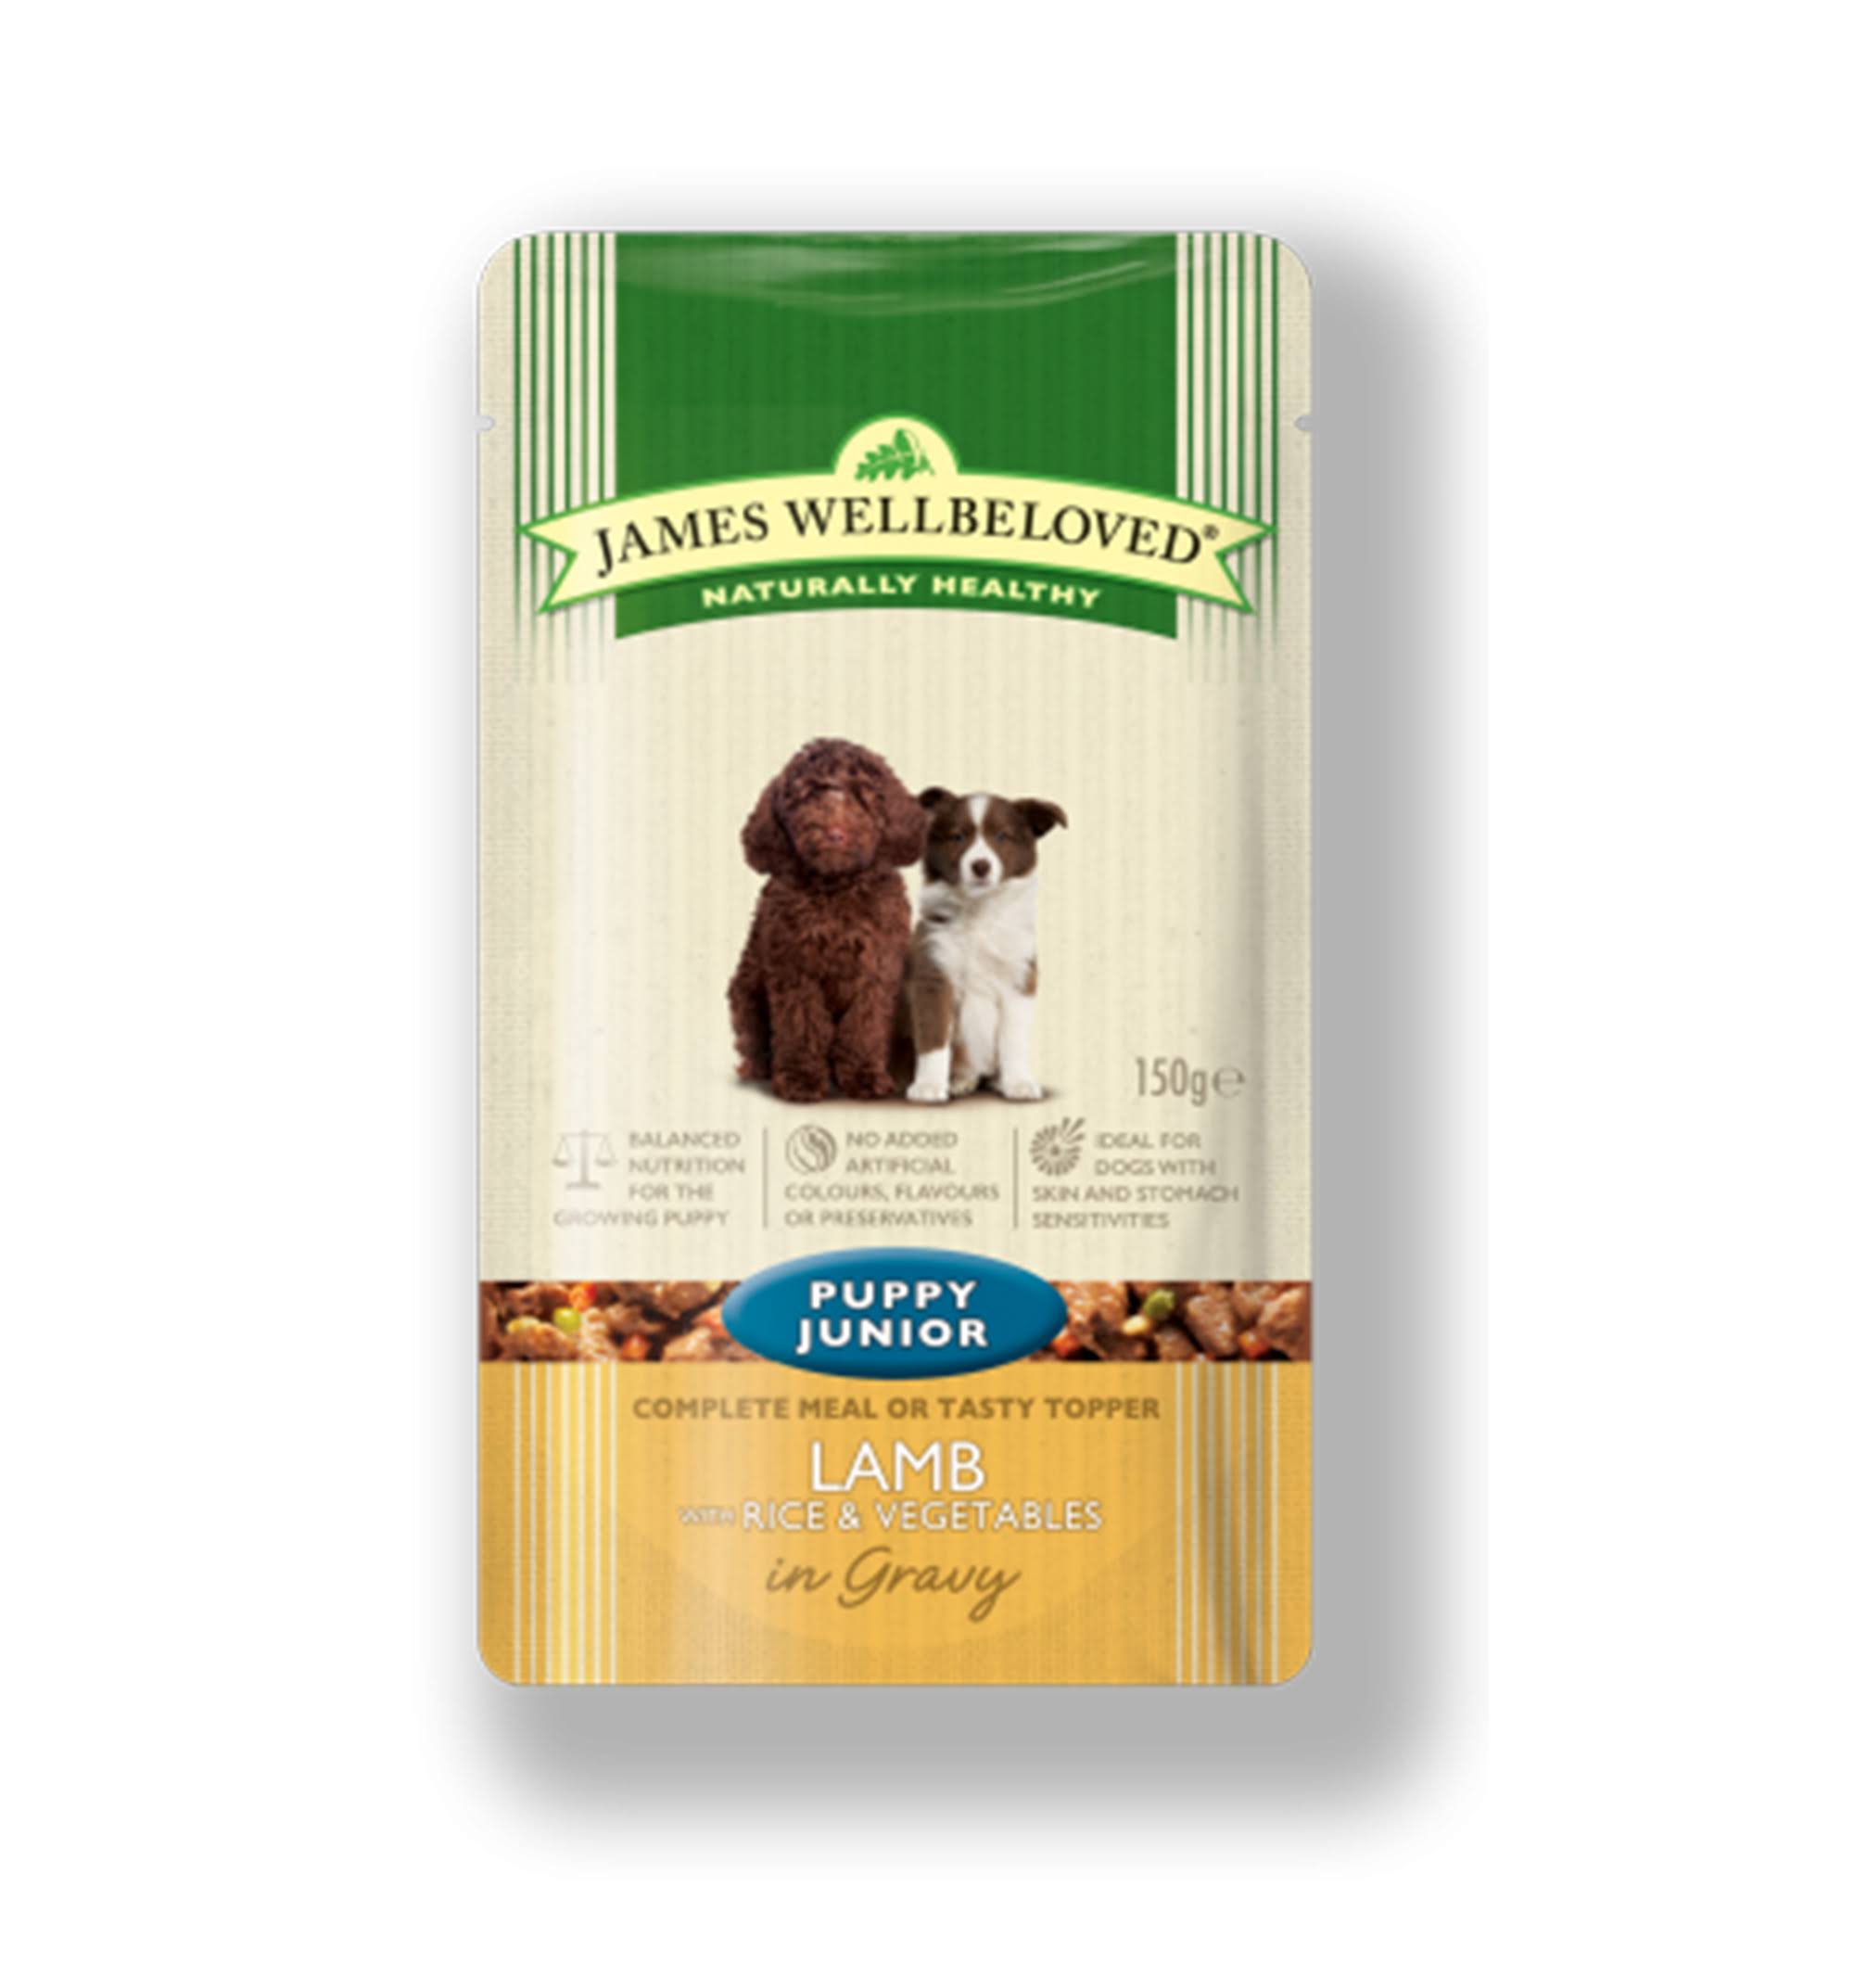 James Wellbeloved Puppy Food - Lamb with Rice